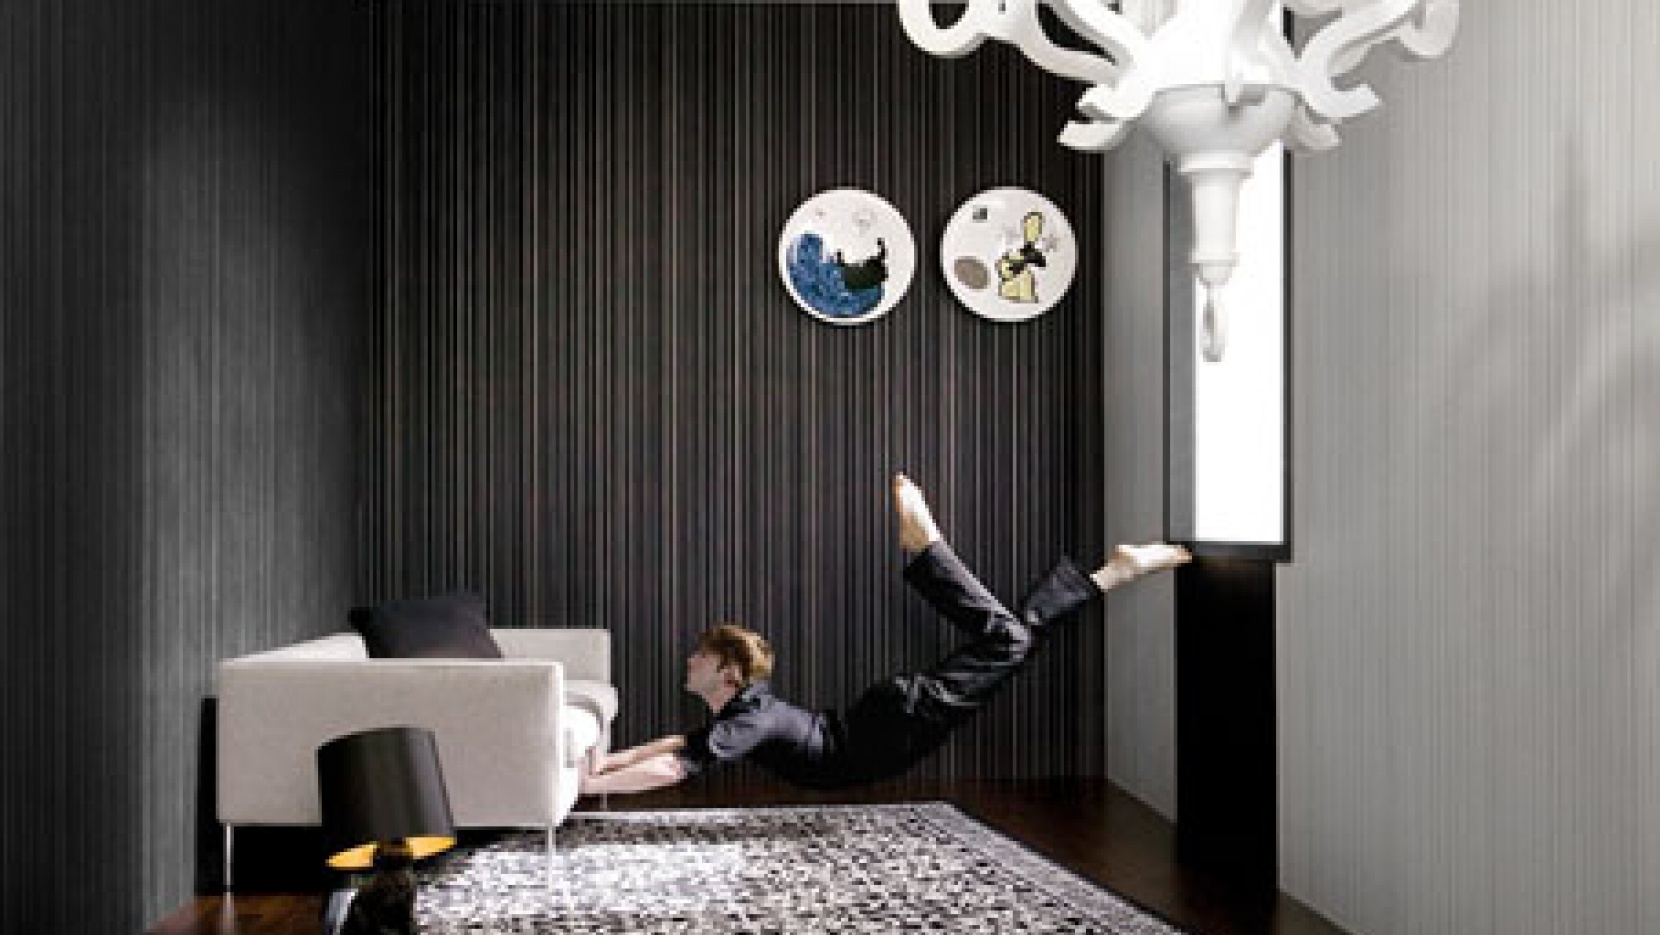 Sports Furniture By Florian Hauswirth And Thomas Walde - Marcel Wanders - HD Wallpaper 